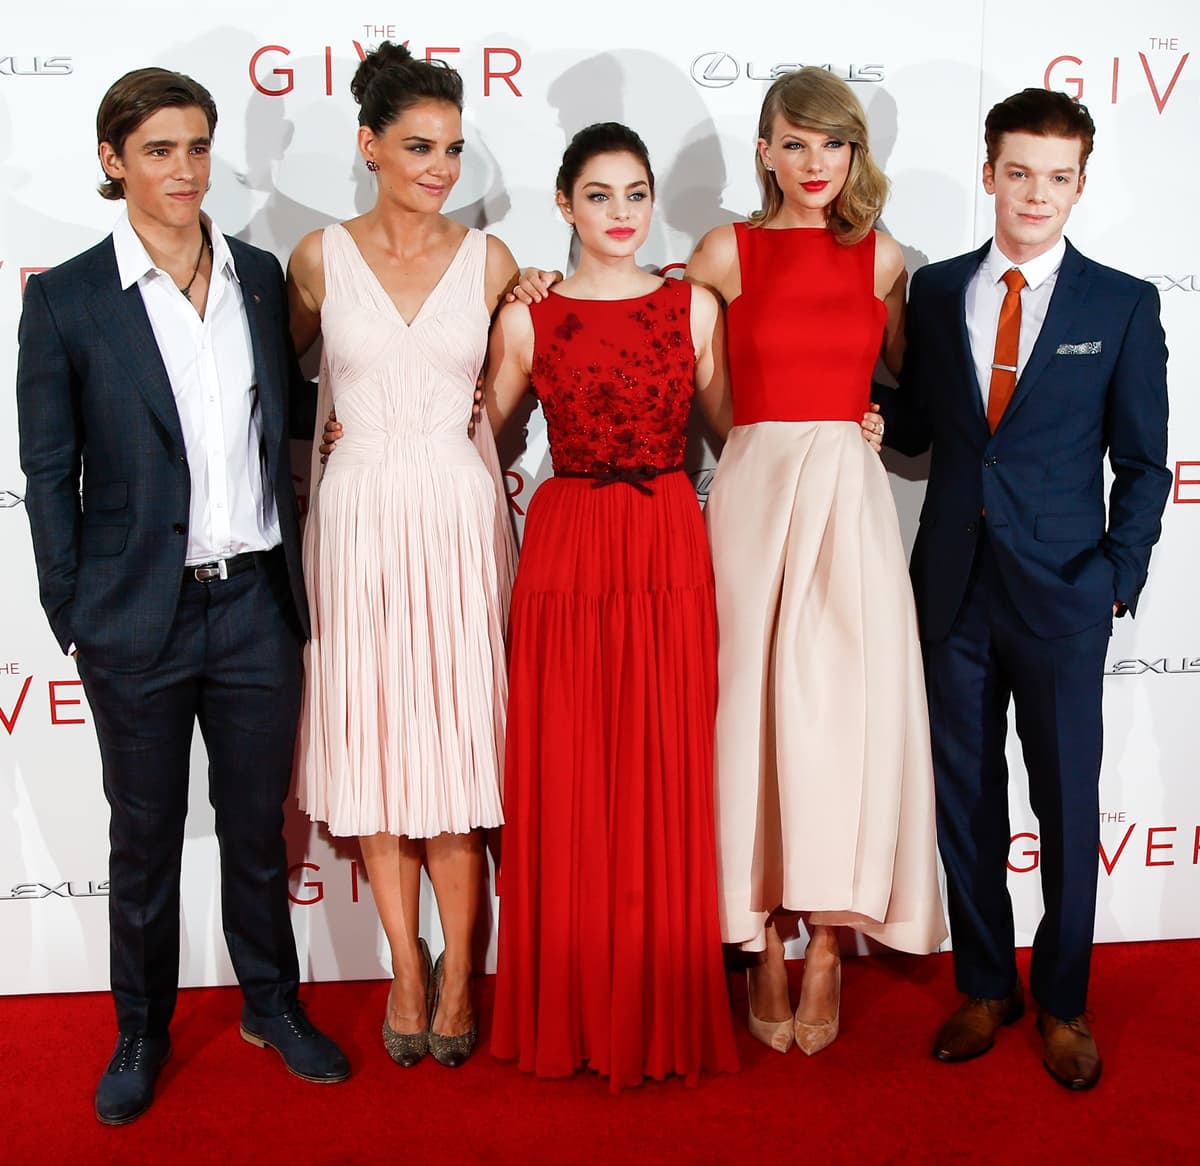 Actors Brenton Thwaites, Katie Holmes, Odeya Rush, Taylor Swift, and Cameron Monaghan attend "The Giver"